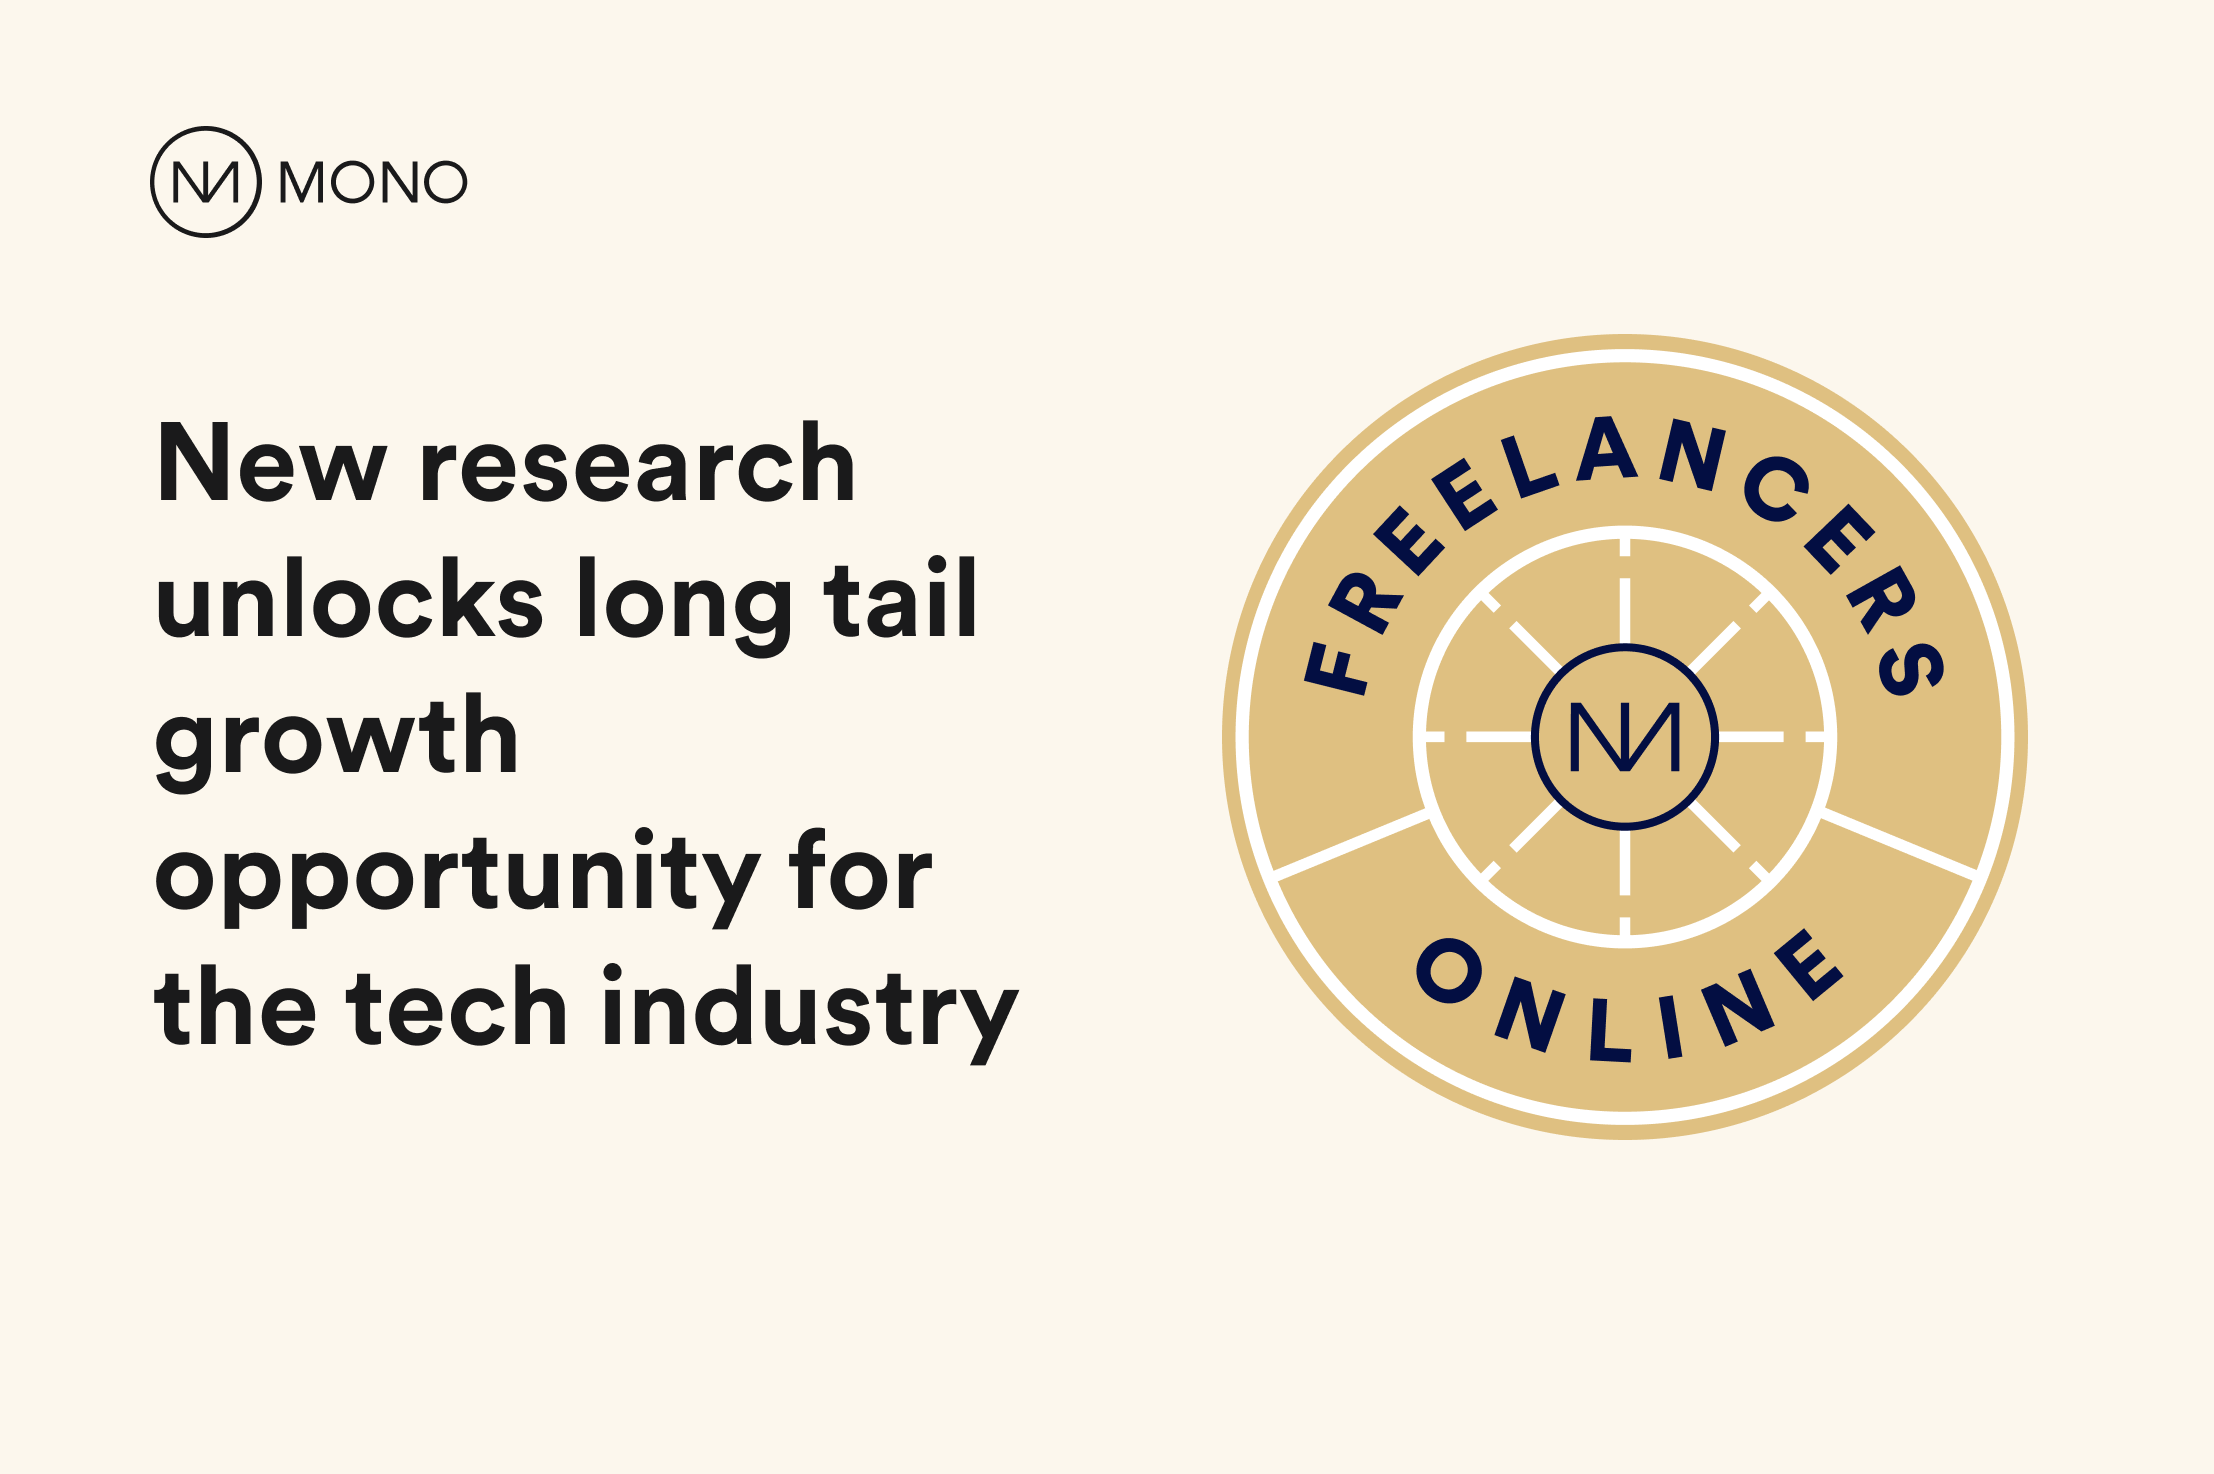 New research unlocks long tail growth opportunity for the tech industry